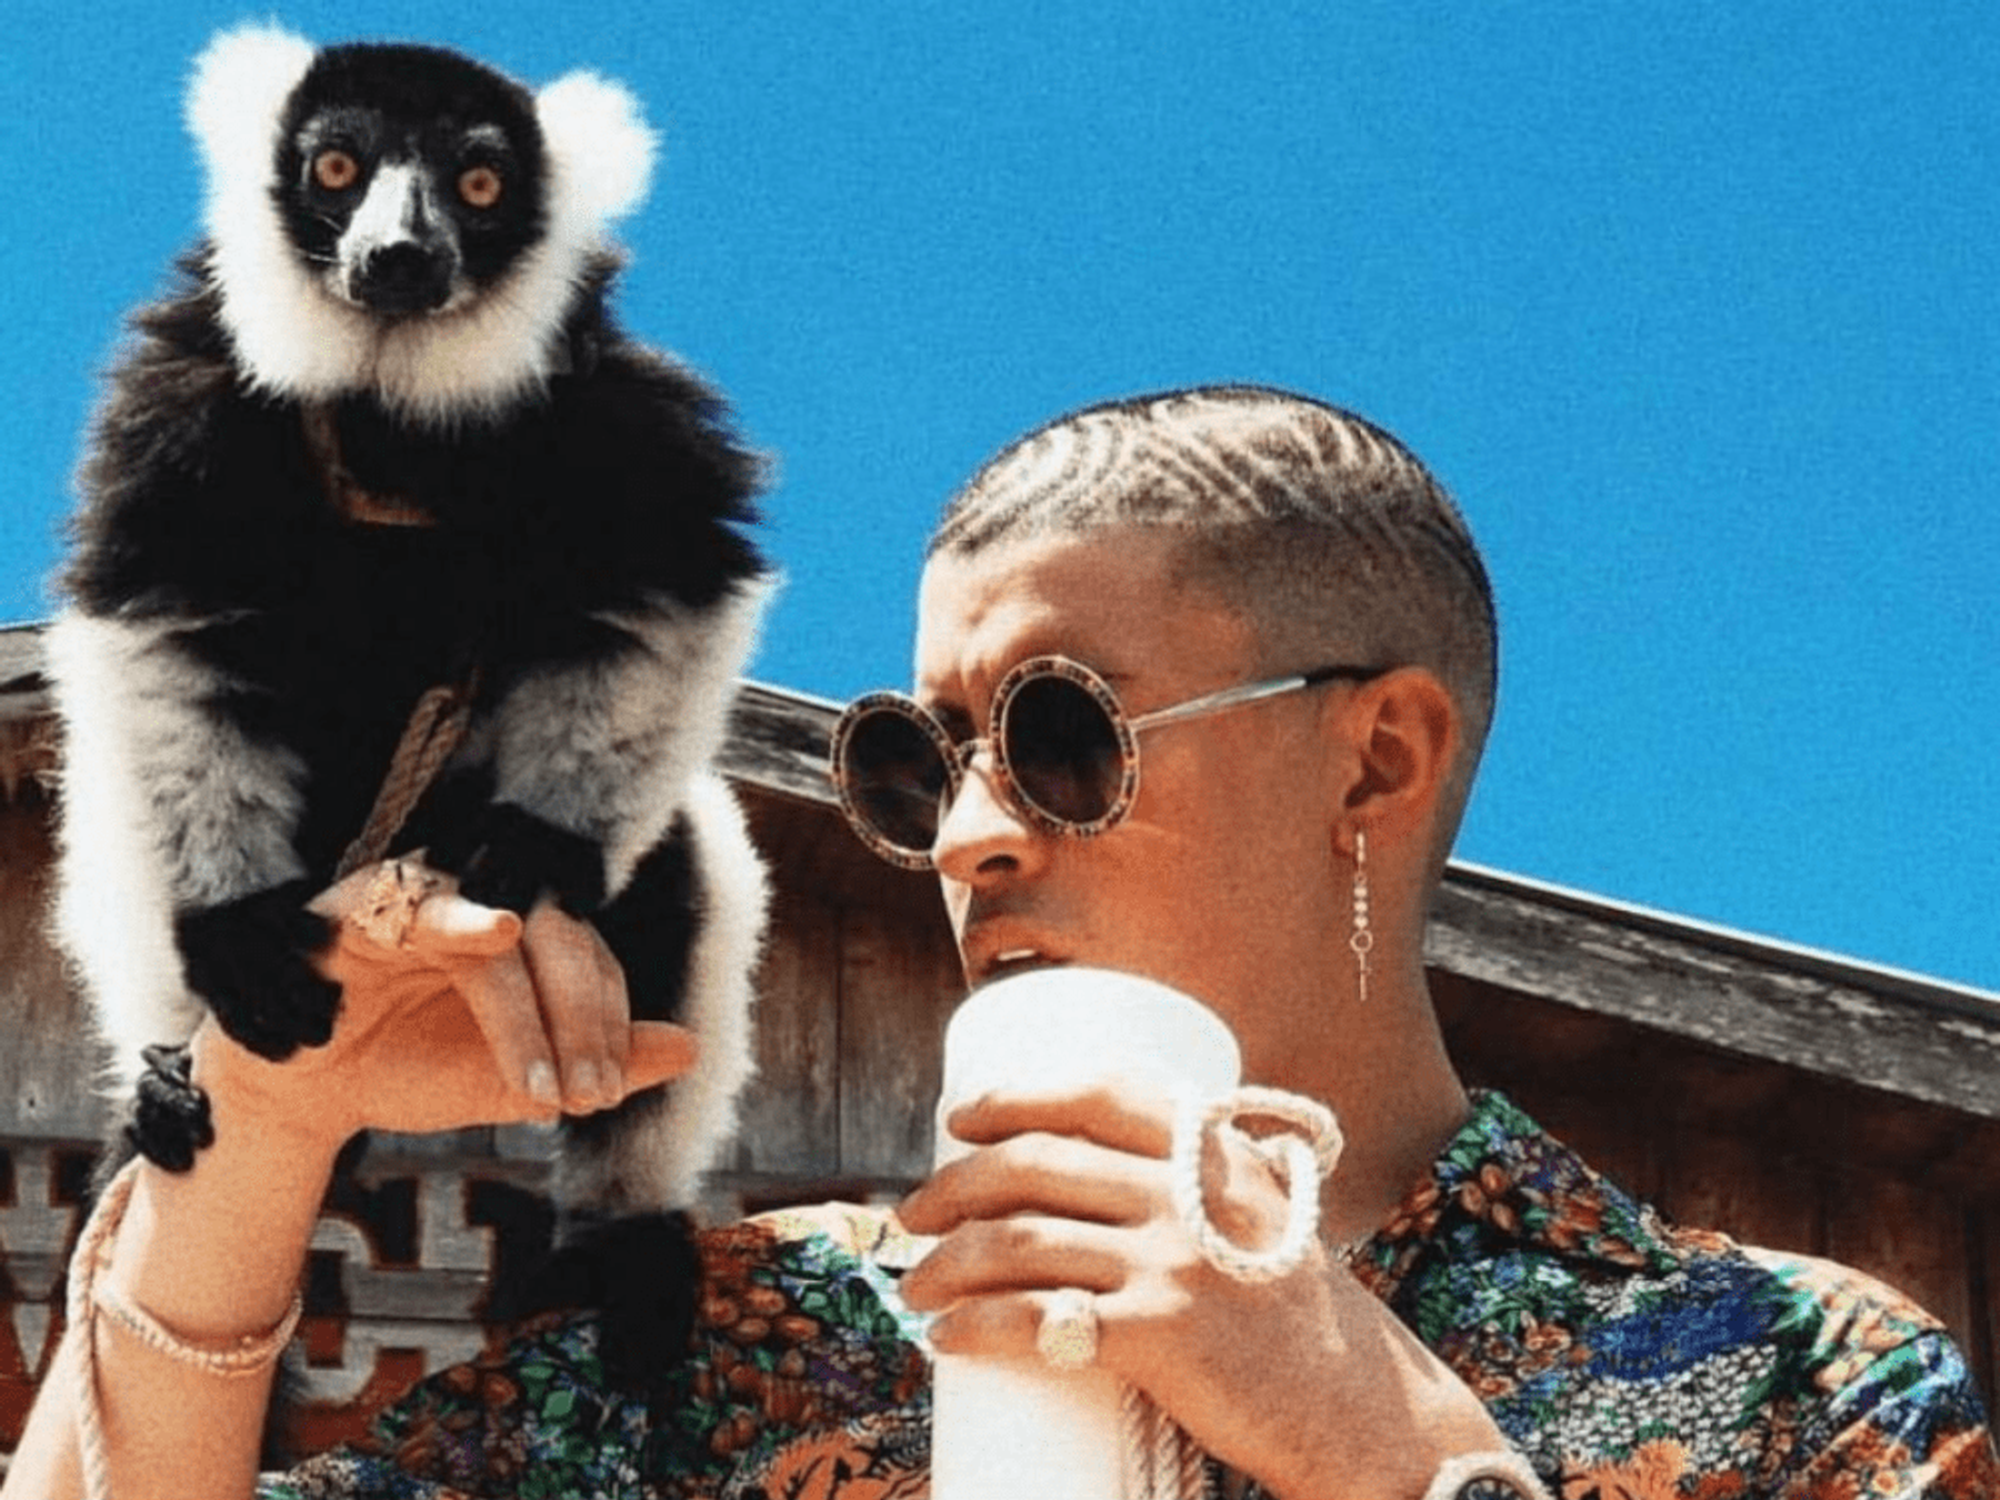 Latin trap and reggaeton star Bad Bunny performs live at the Freeman Coliseum this Friday.